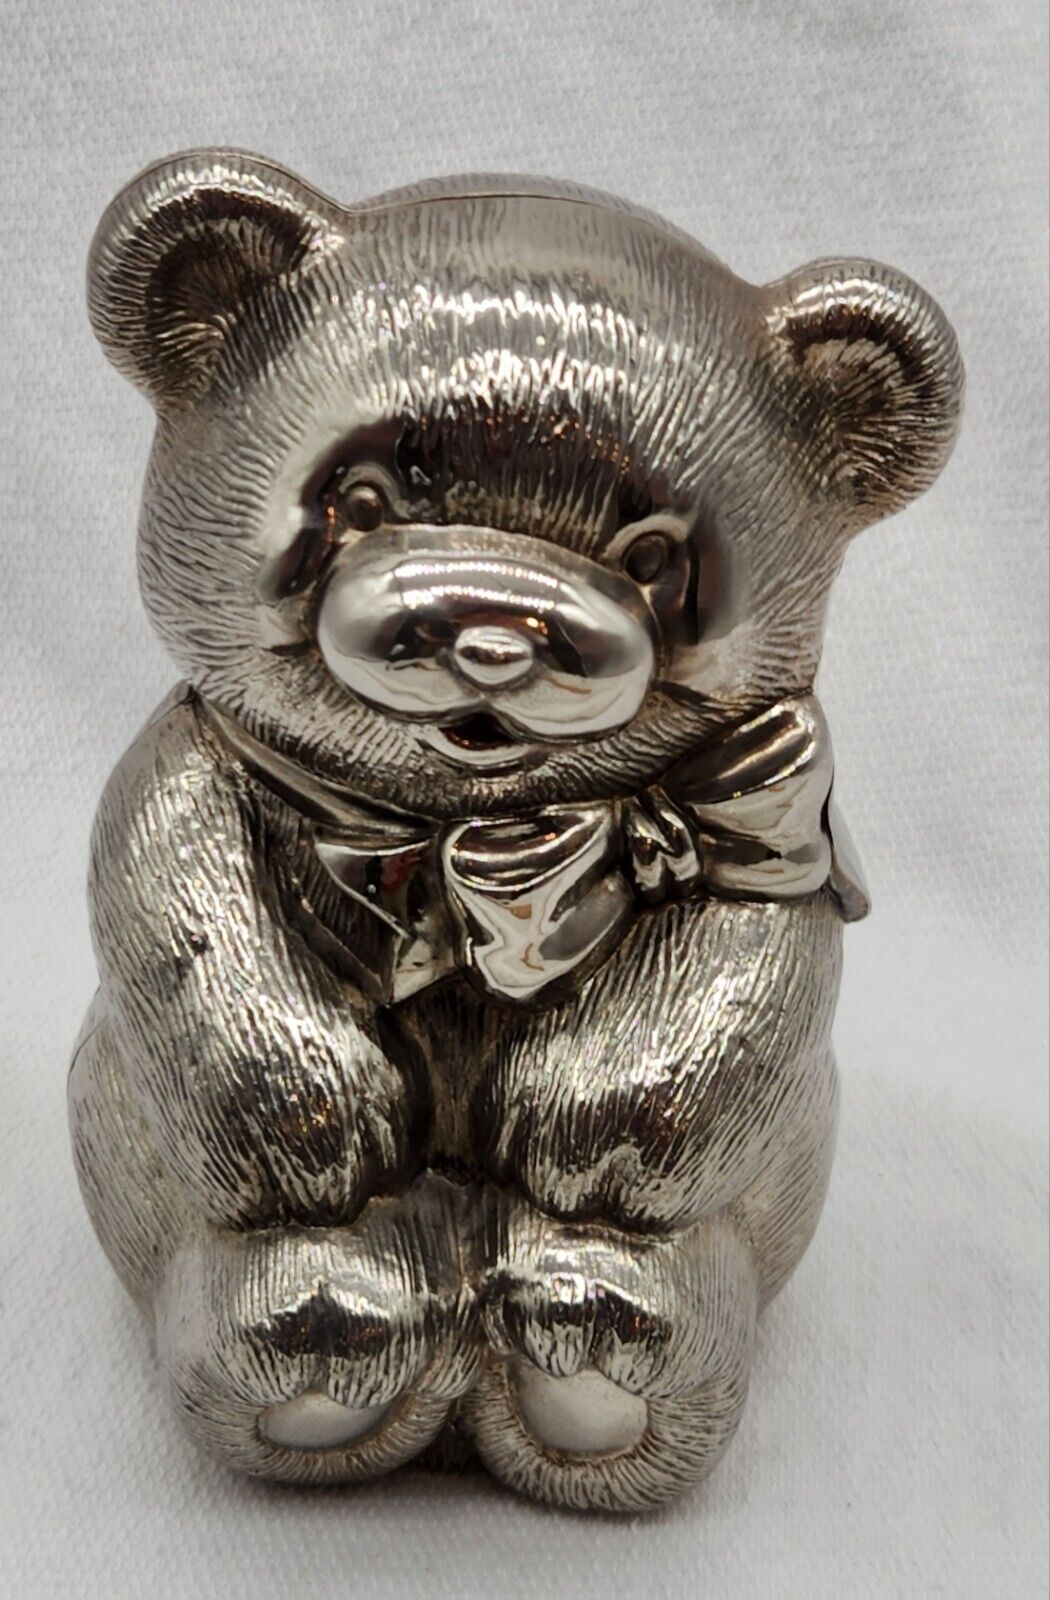 Vintage Silverplate Teddy Bear Coin Piggy Bank With Neck Bow. Beautiful, Used.